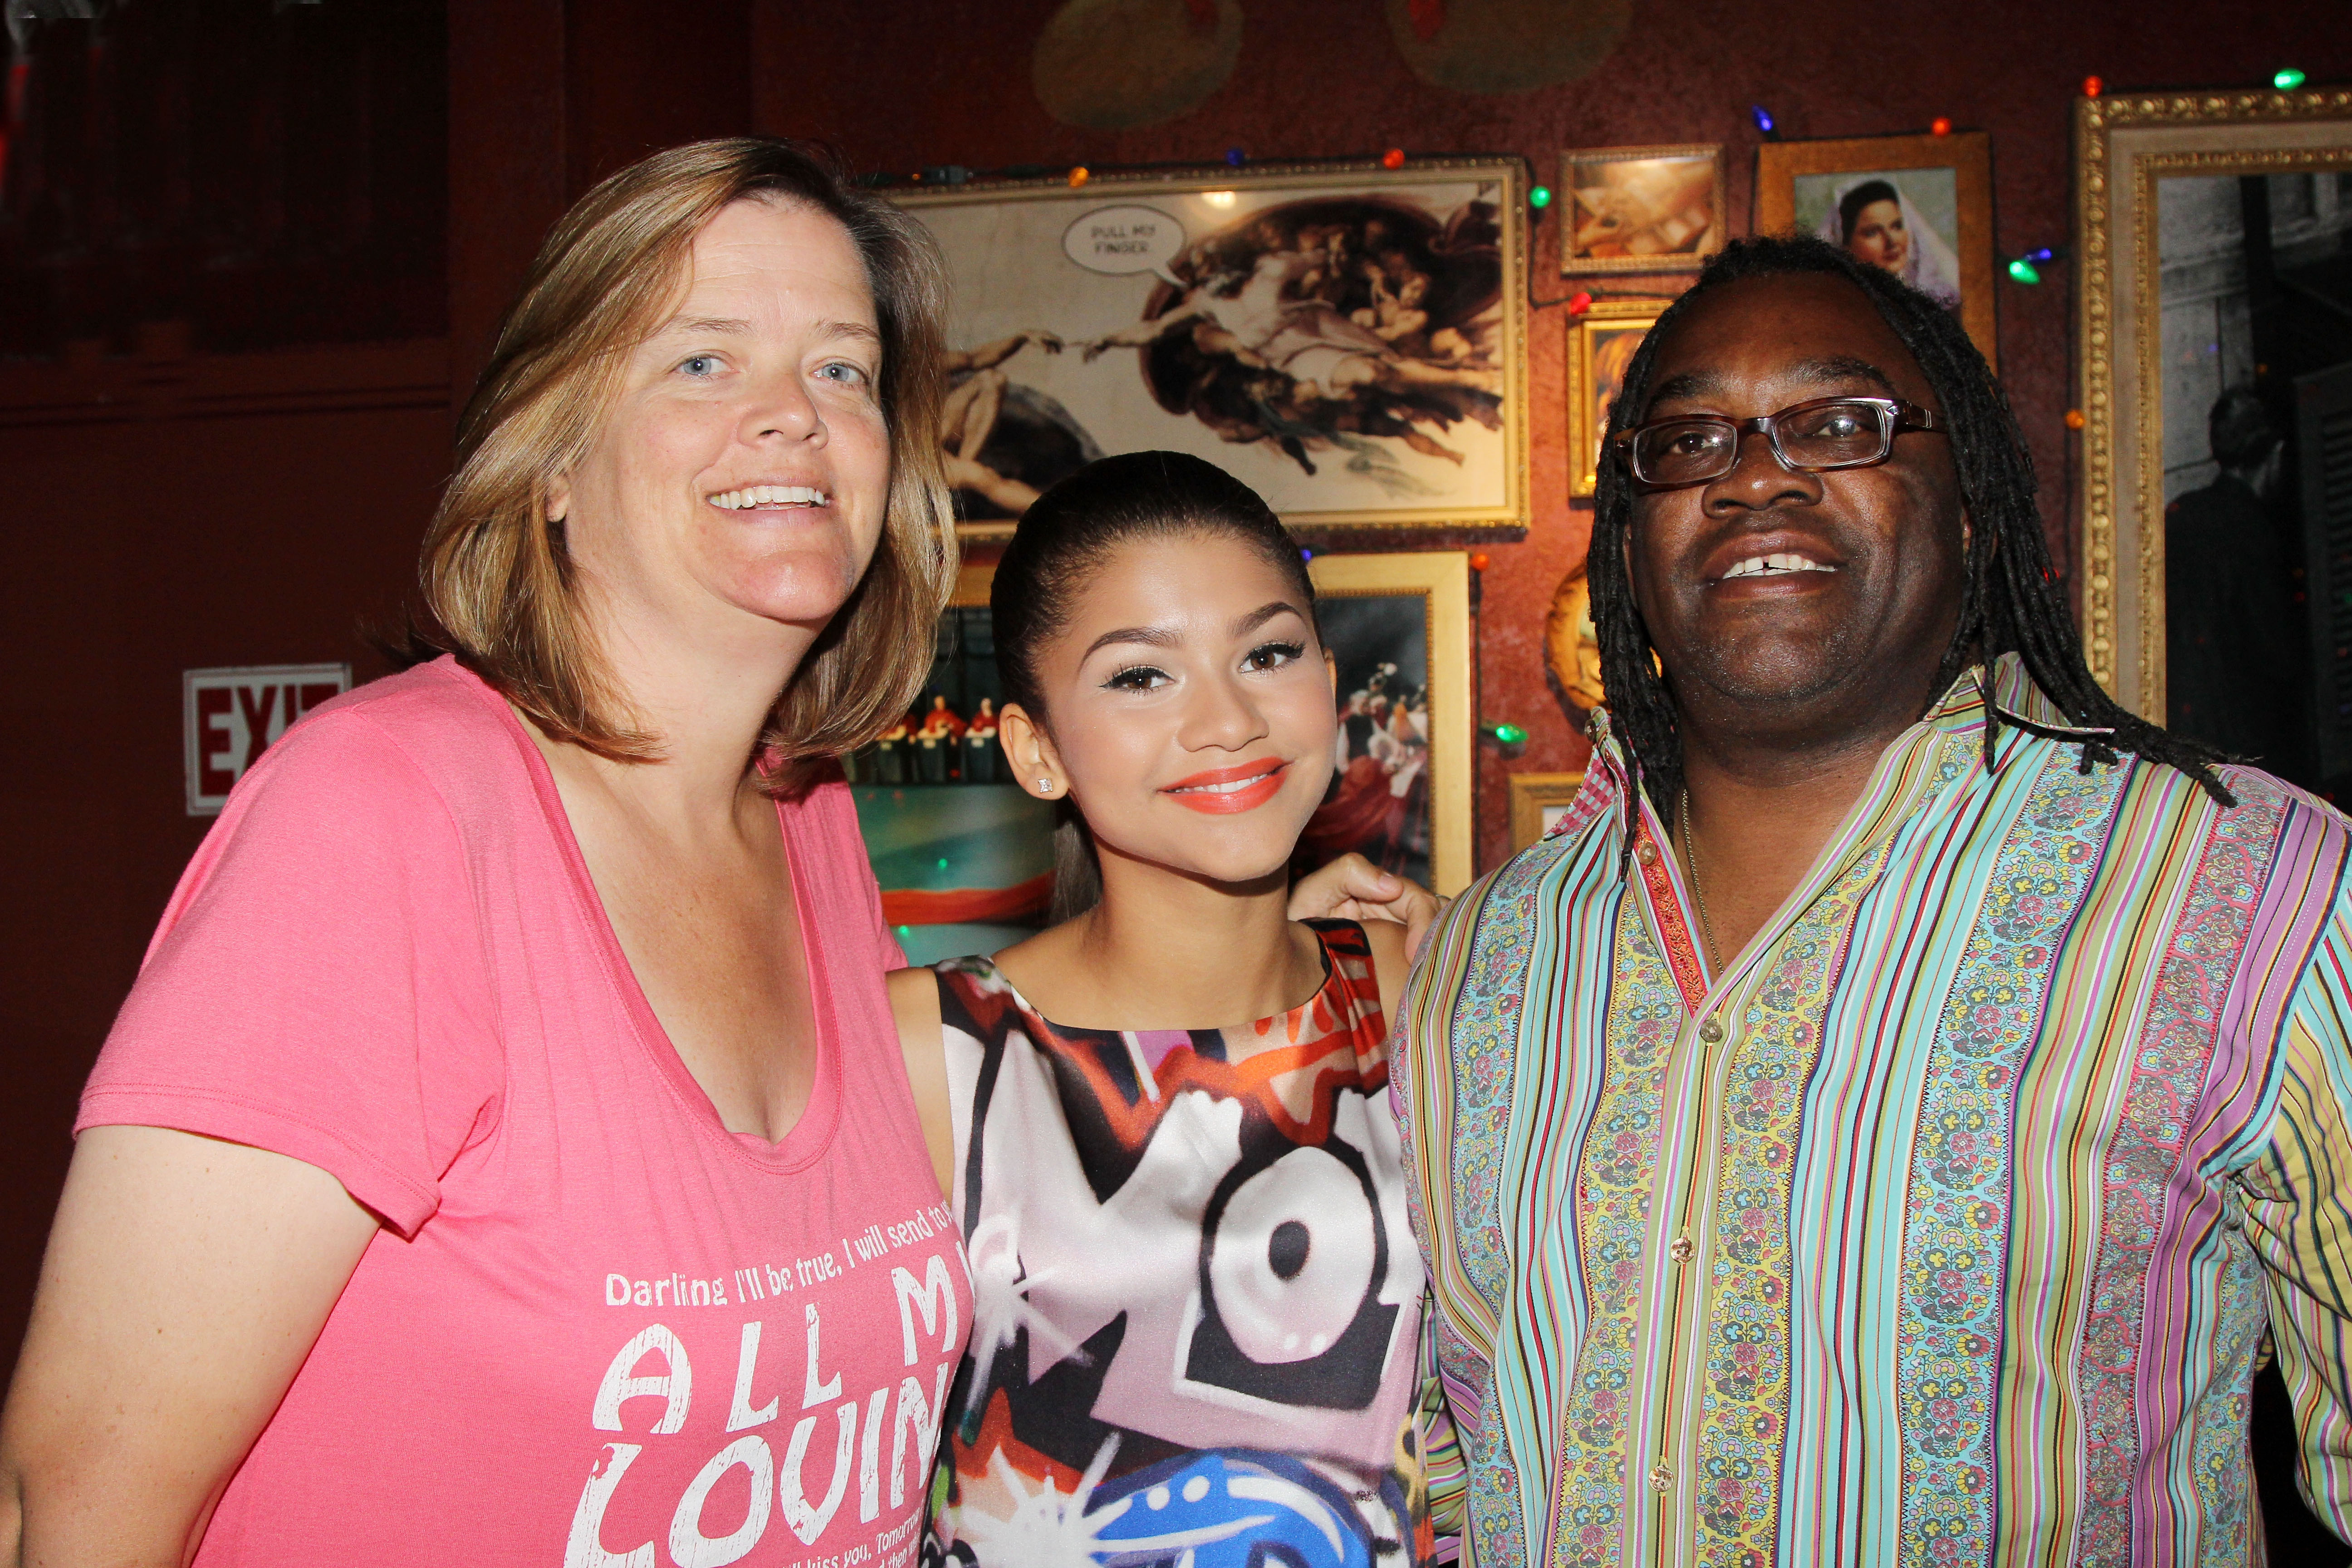 While Zendaya's parents are no longer romantically together, they remain friends